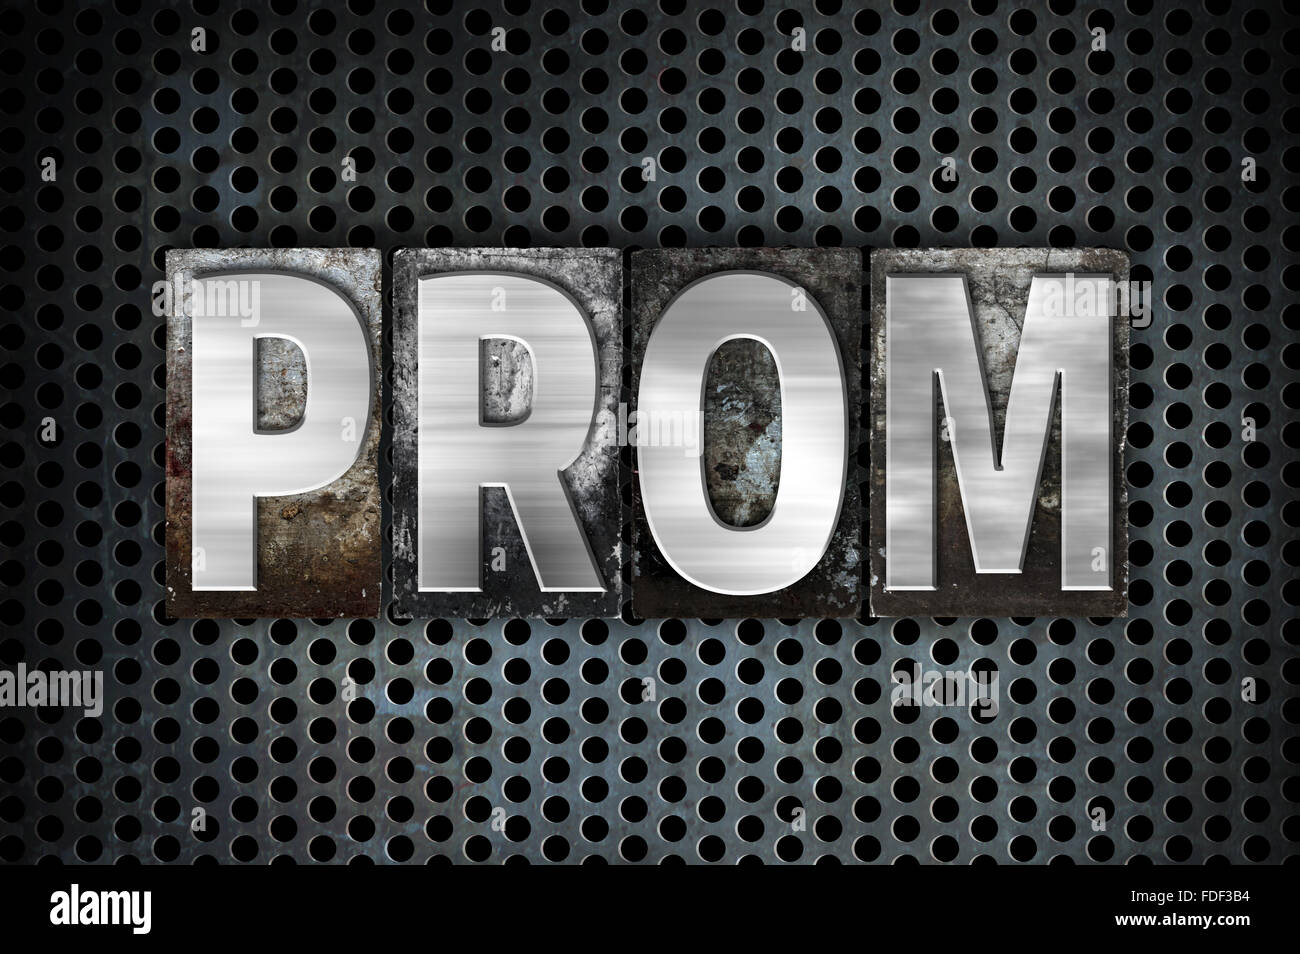 The word 'Prom' written in vintage metal letterpress type on a black industrial grid background. Stock Photo